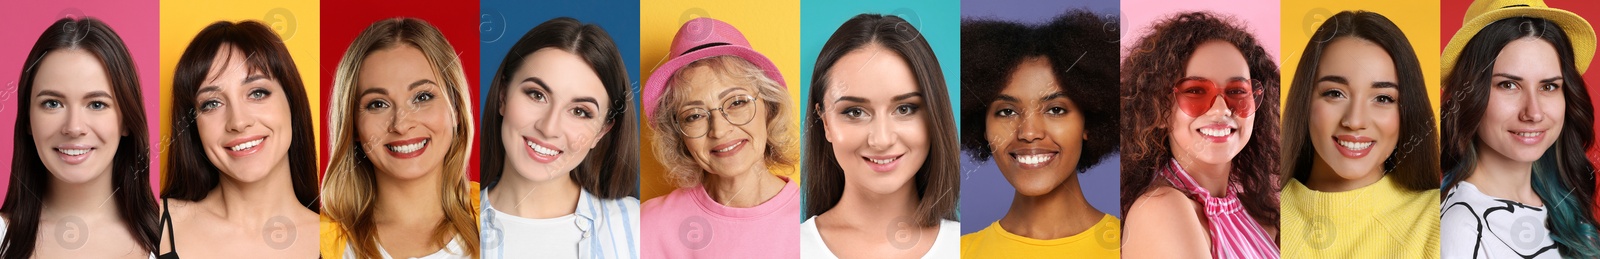 Image of Set with portraits of happy women on different color backgrounds